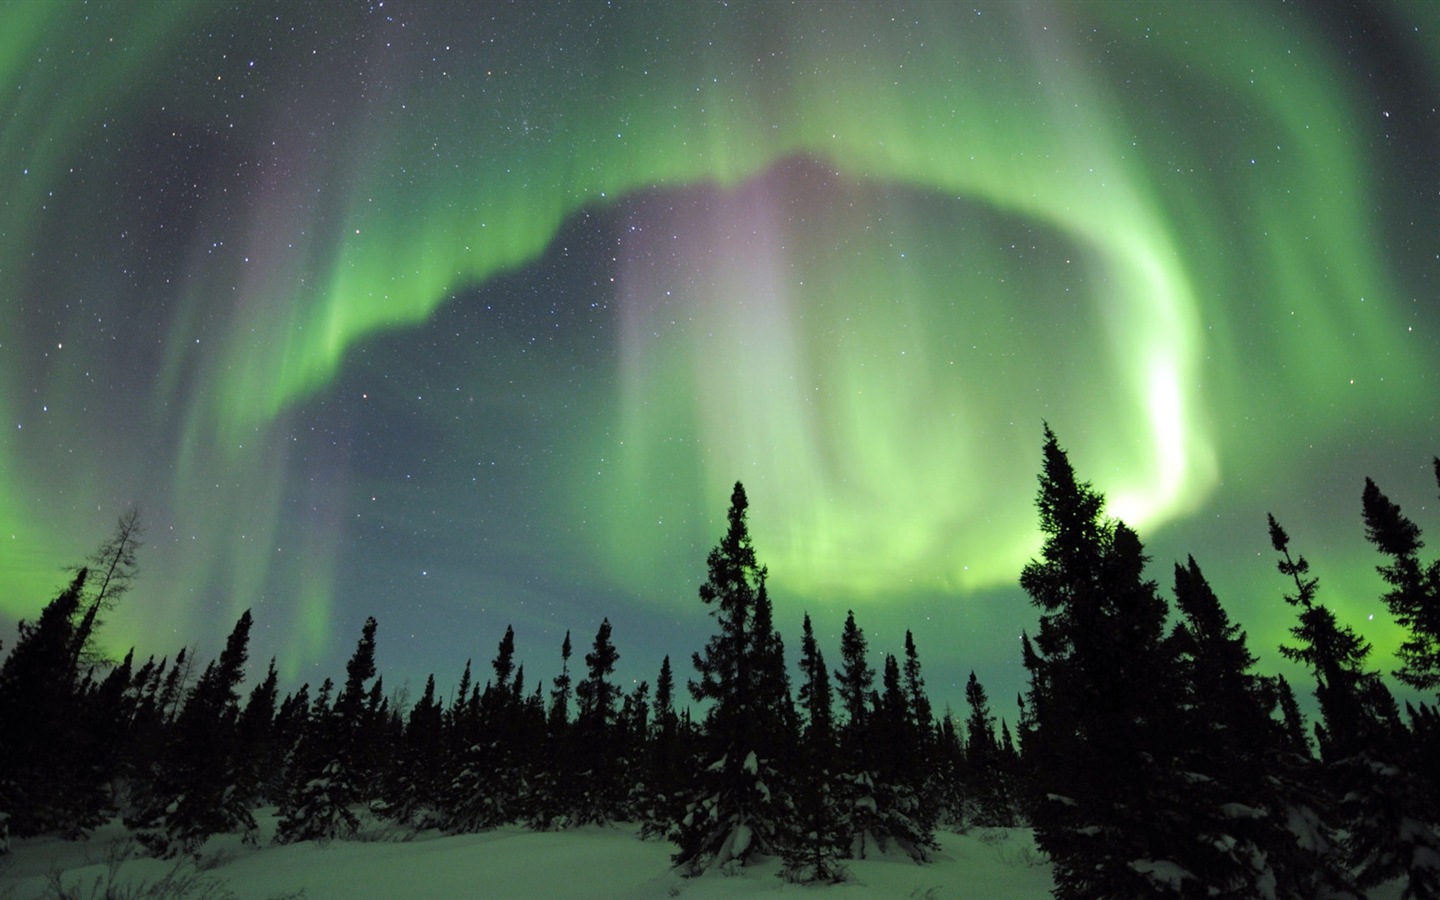 Natural wonders of the Northern Lights HD Wallpaper (2) #9 - 1440x900